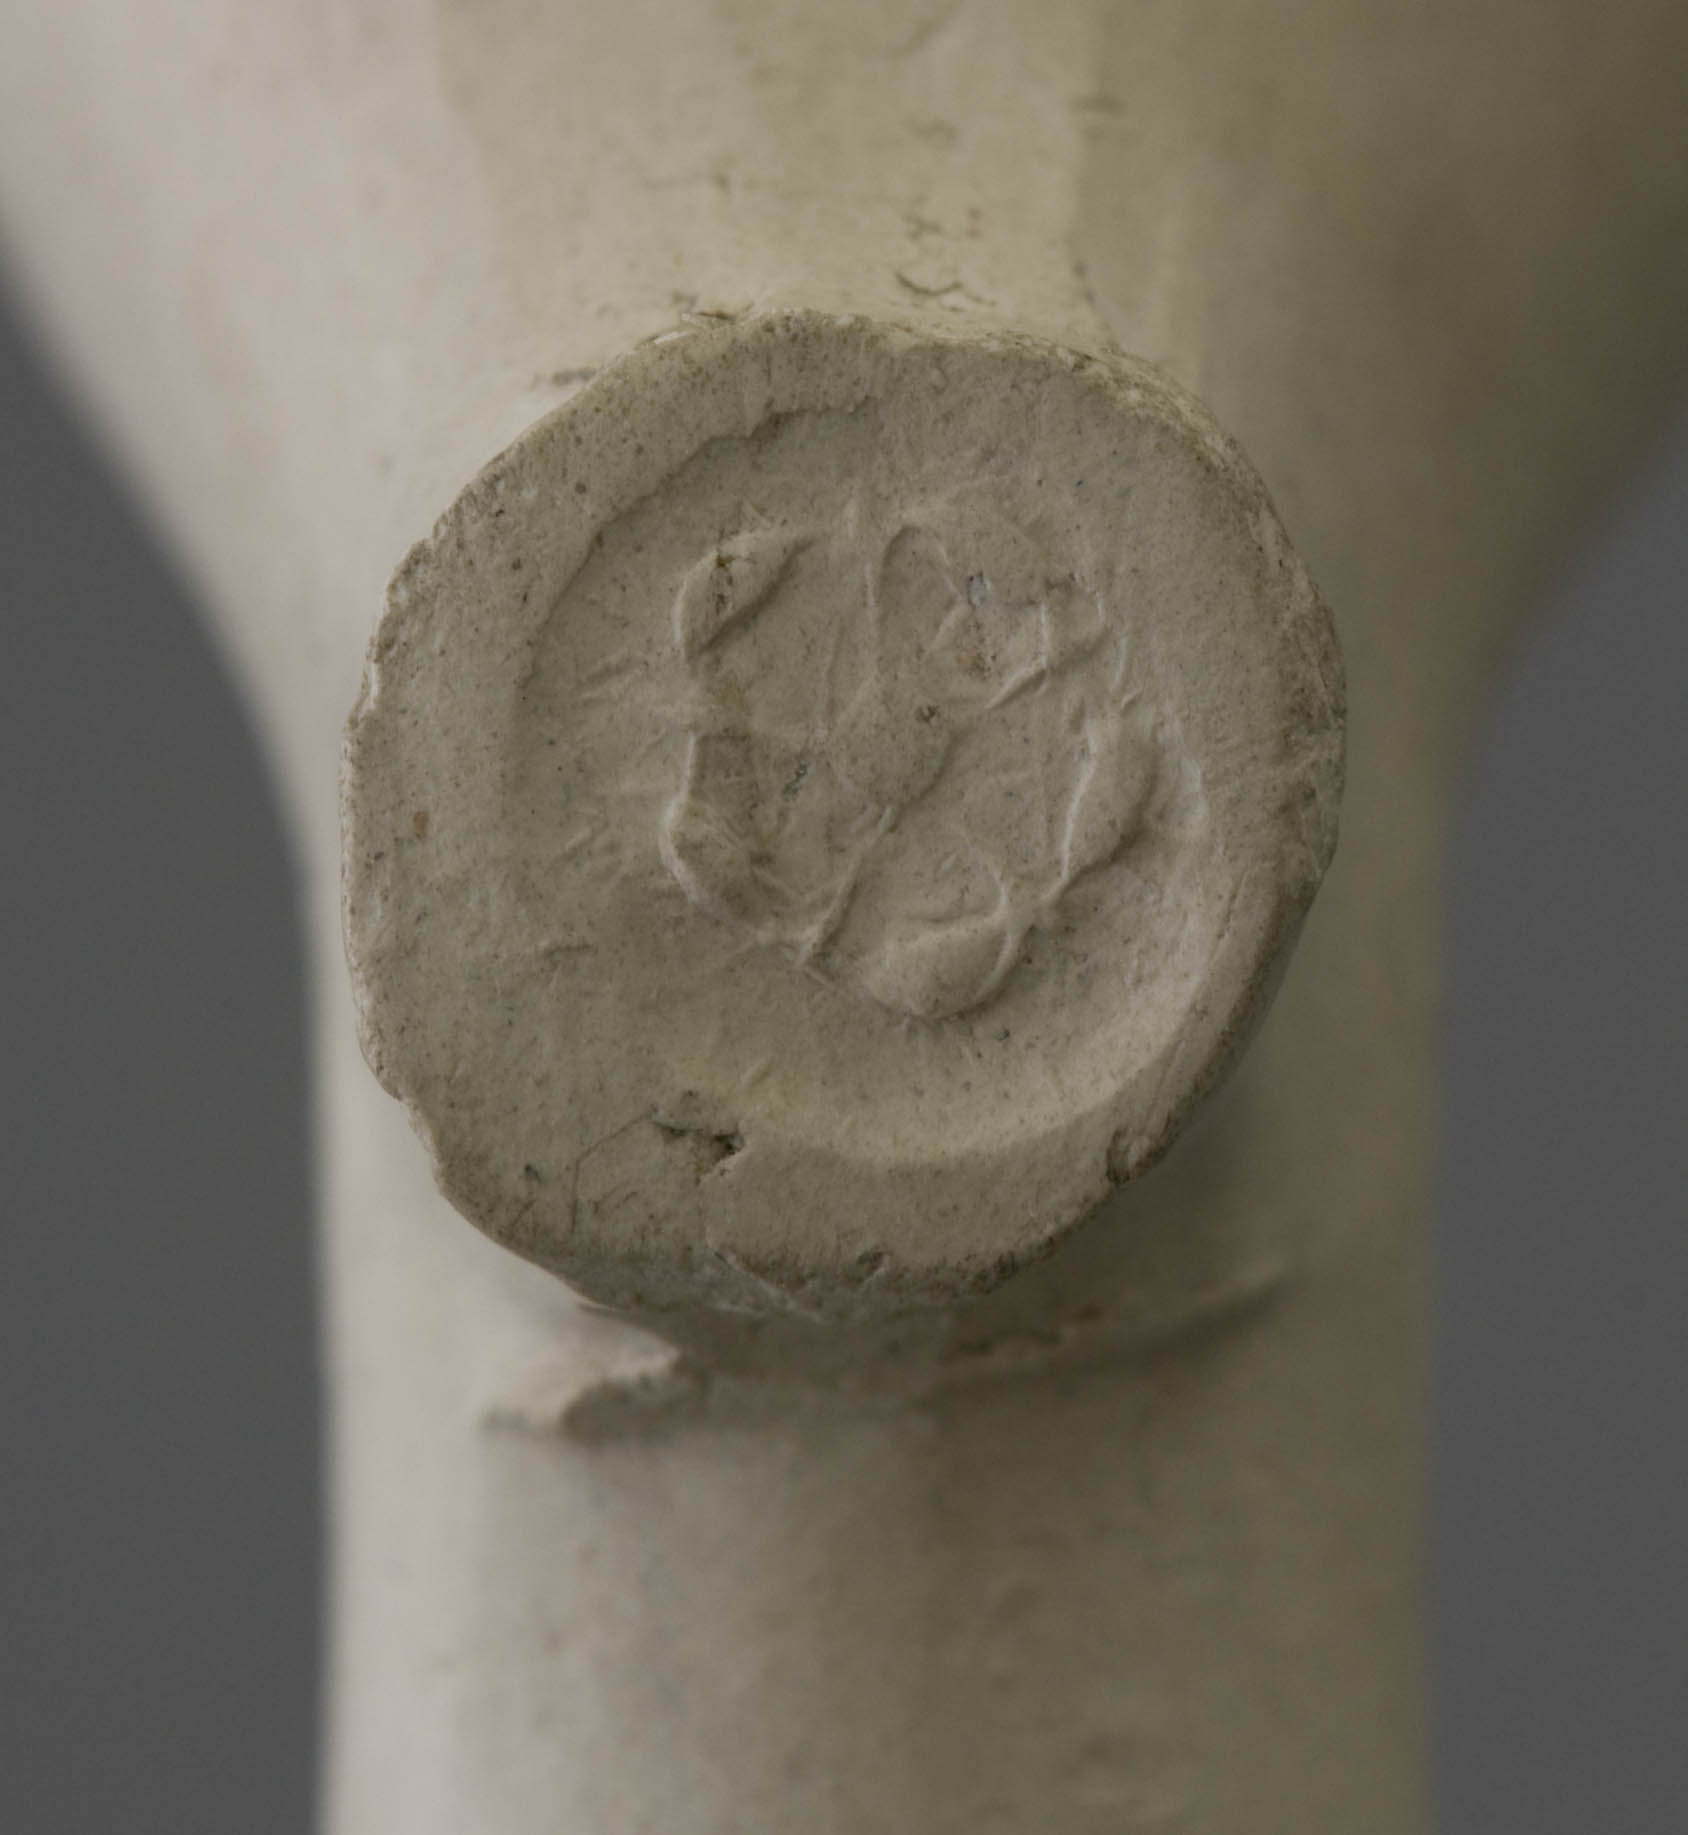 06-02.357a-claypipe-biconical-heelmark-rose-3